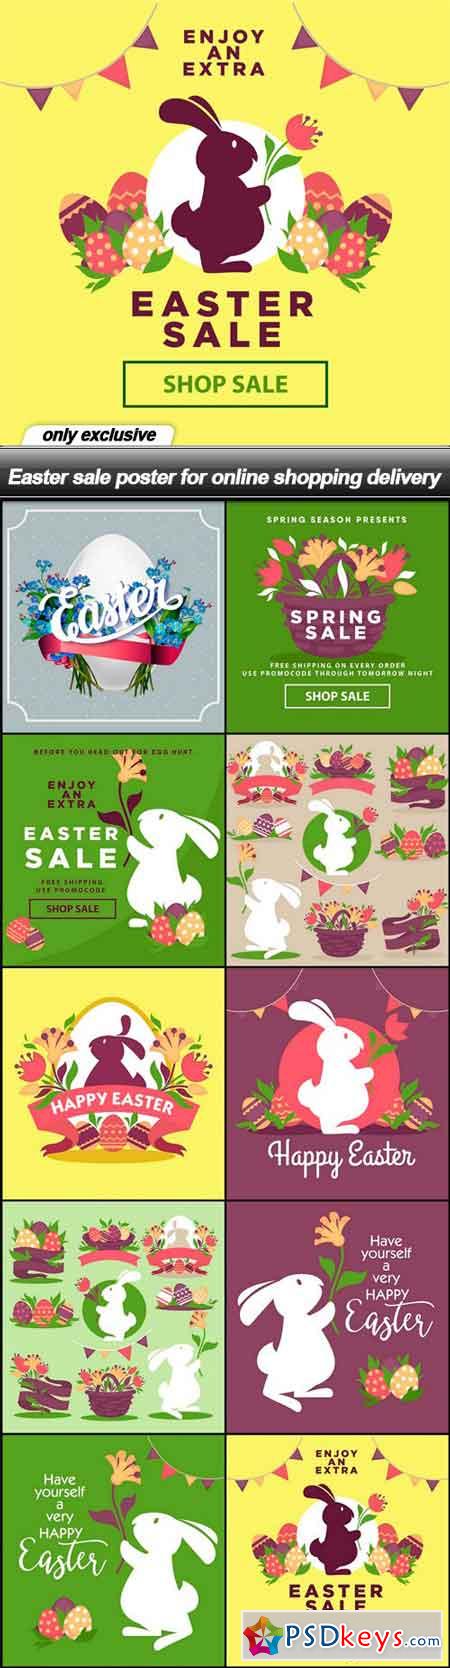 Easter sale poster for online shopping delivery - 10 EPS